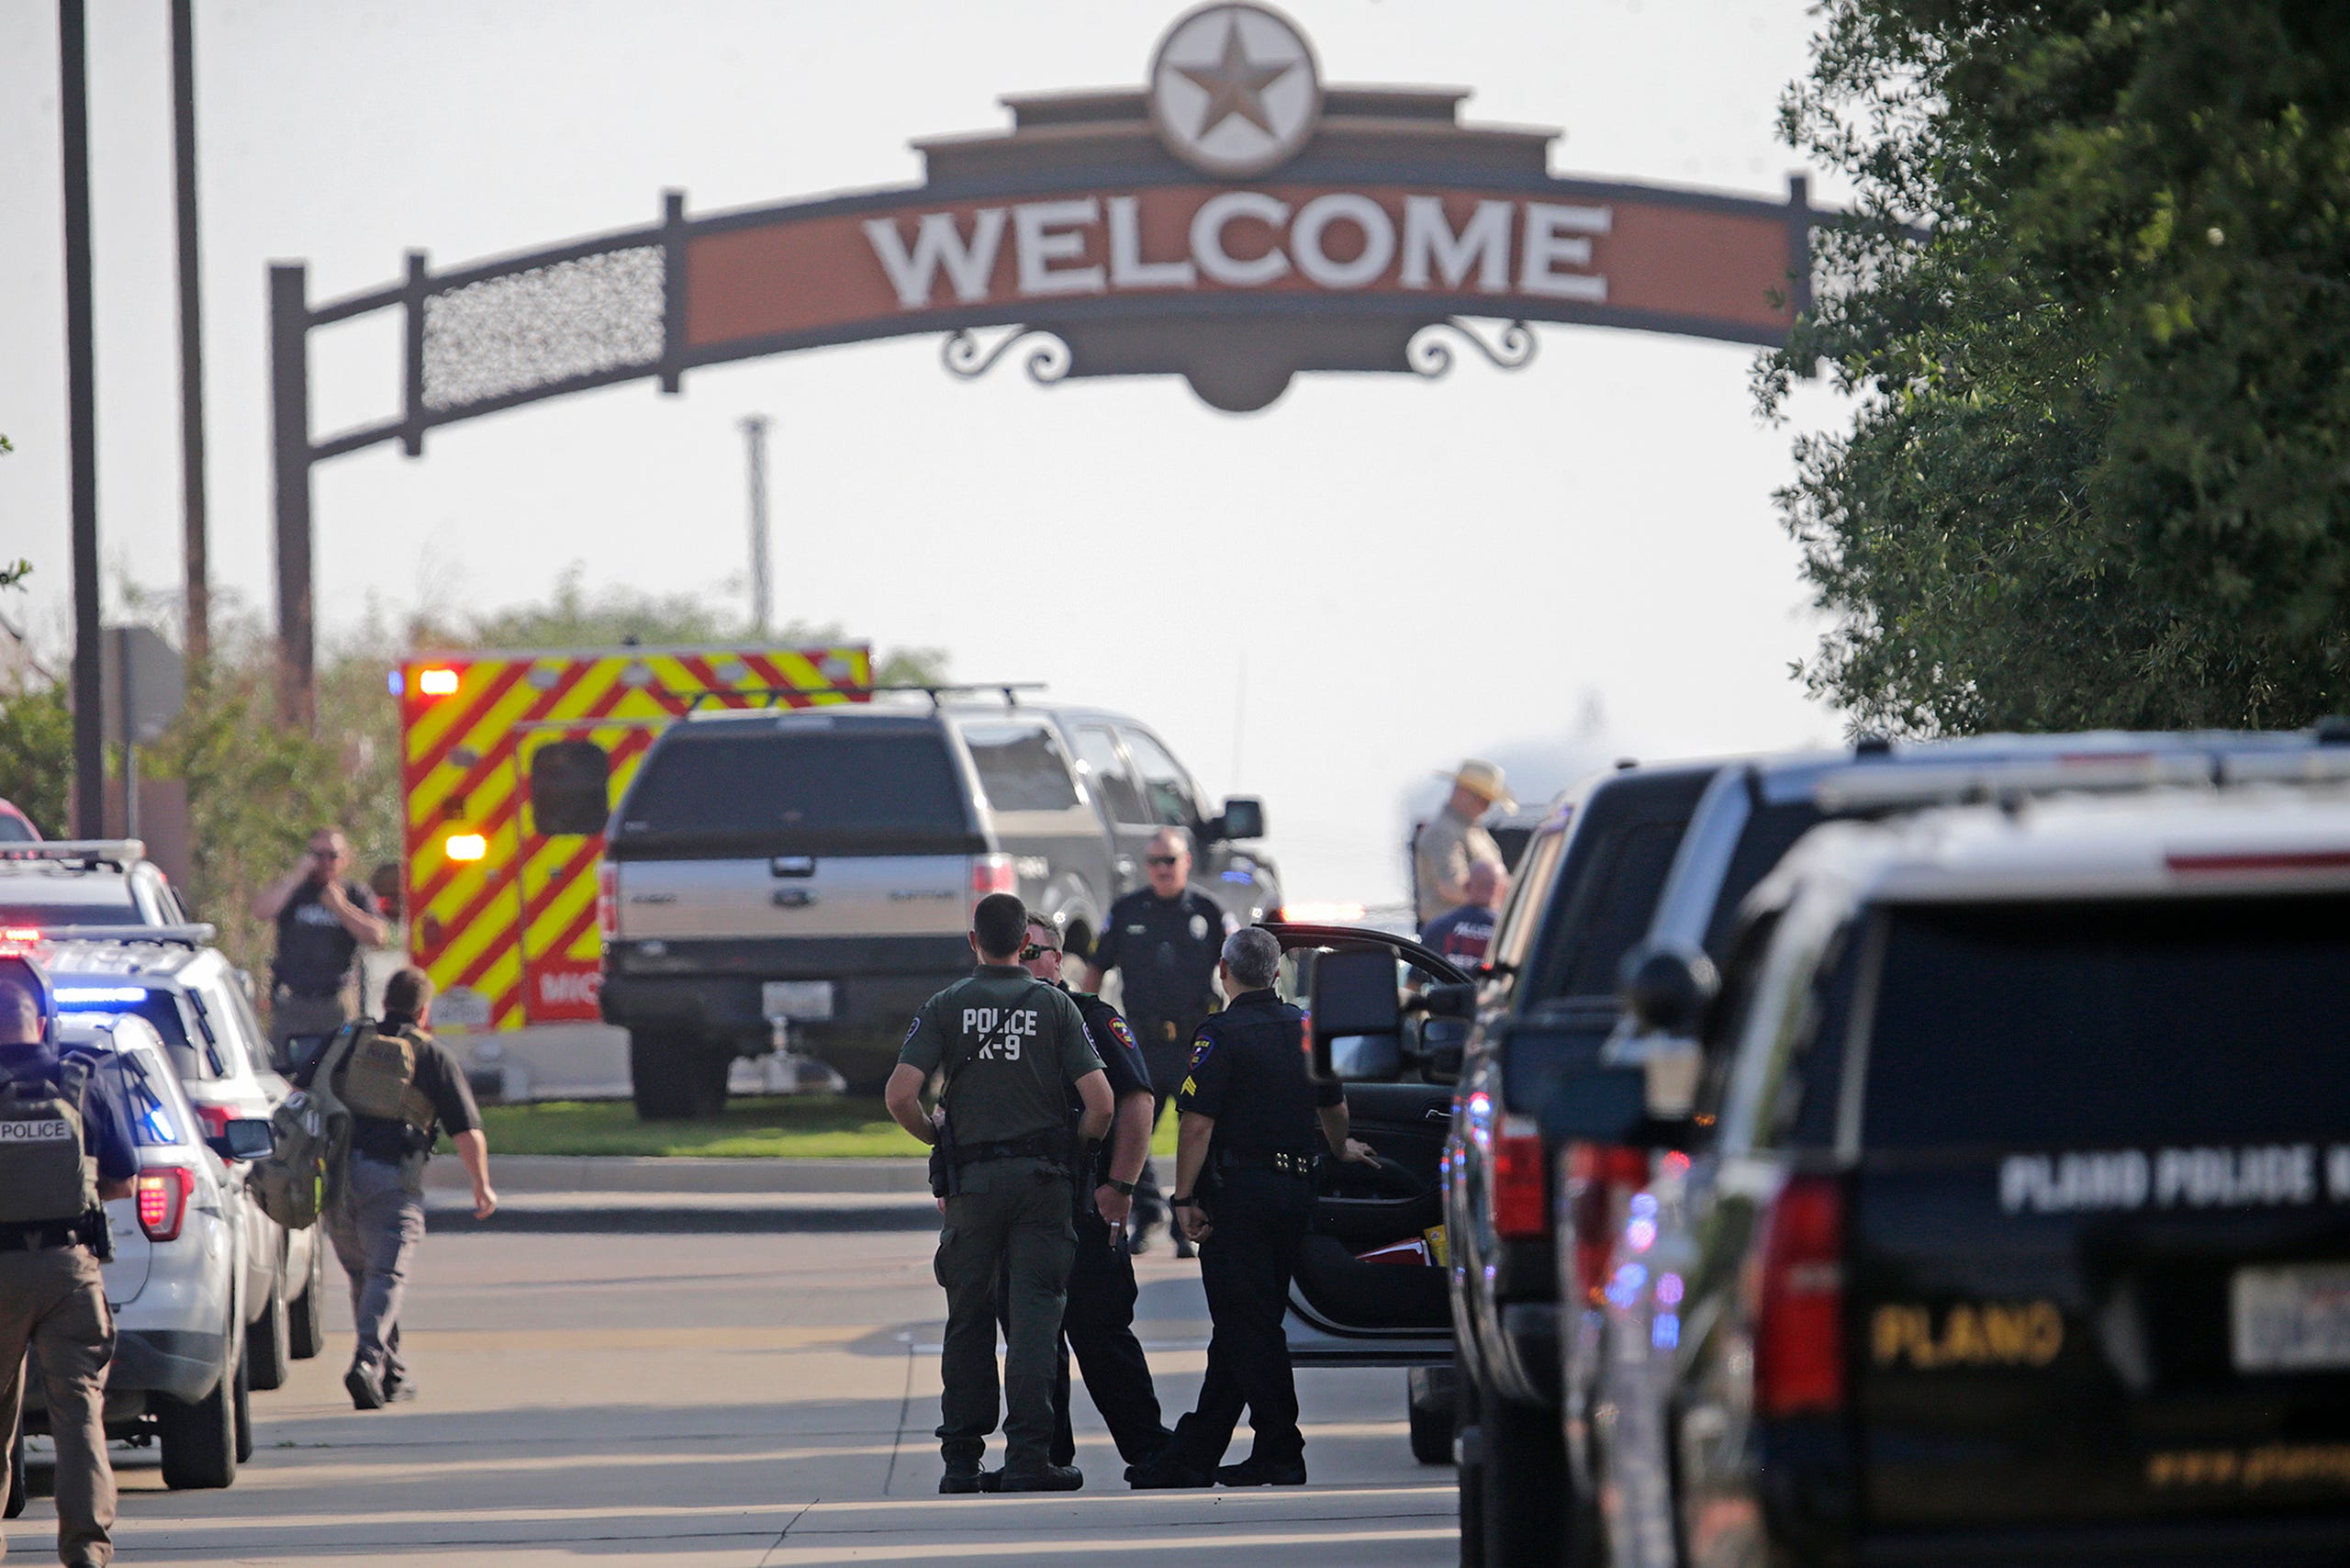 Emergency personnel work the scene of a shooting at Allen Premium Outlets on May 6, 2023 in Allen, Texas. According to reports, a shooter opened fire at the outlet mall, injuring nine people who were taken to local hospitals. The police have confirmed there were fatalities but have not specified how many. The unidentified shooter was neutralized by an Allen Police officer responding to an unrelated call.